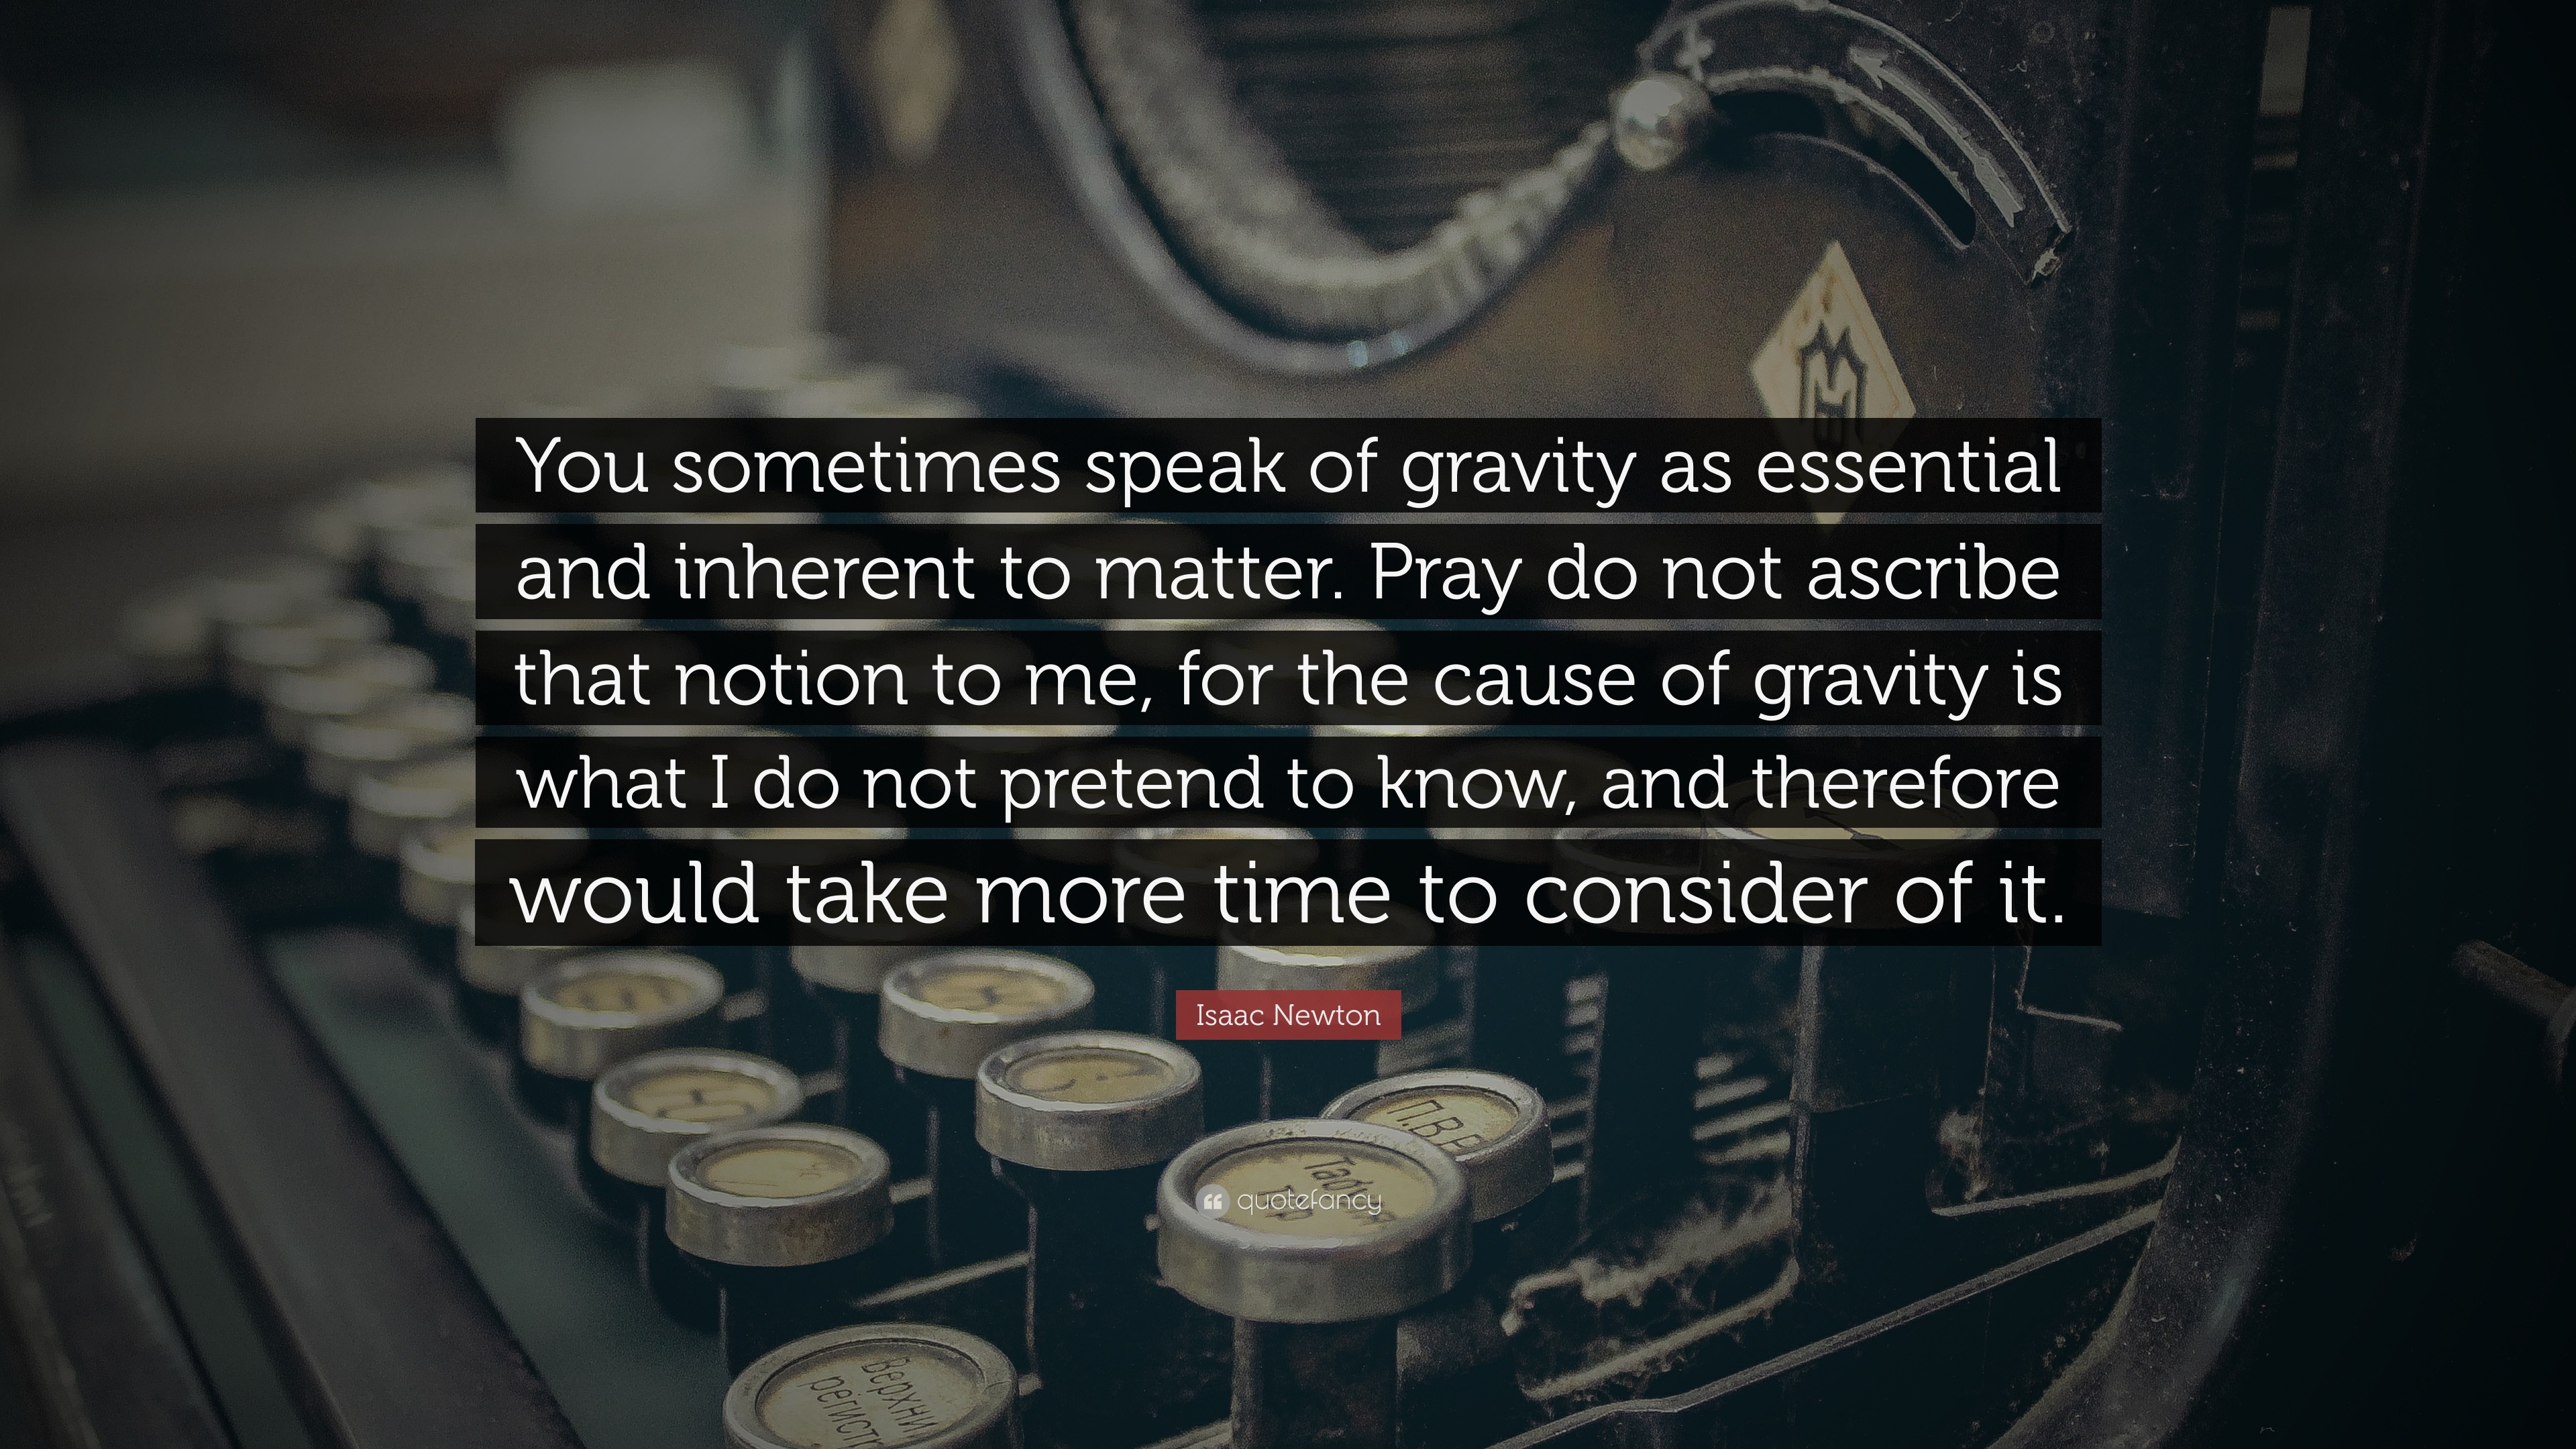 3840x2160 Isaac Newton Quote: “You sometimes speak of gravity as essential and  inherent to matter